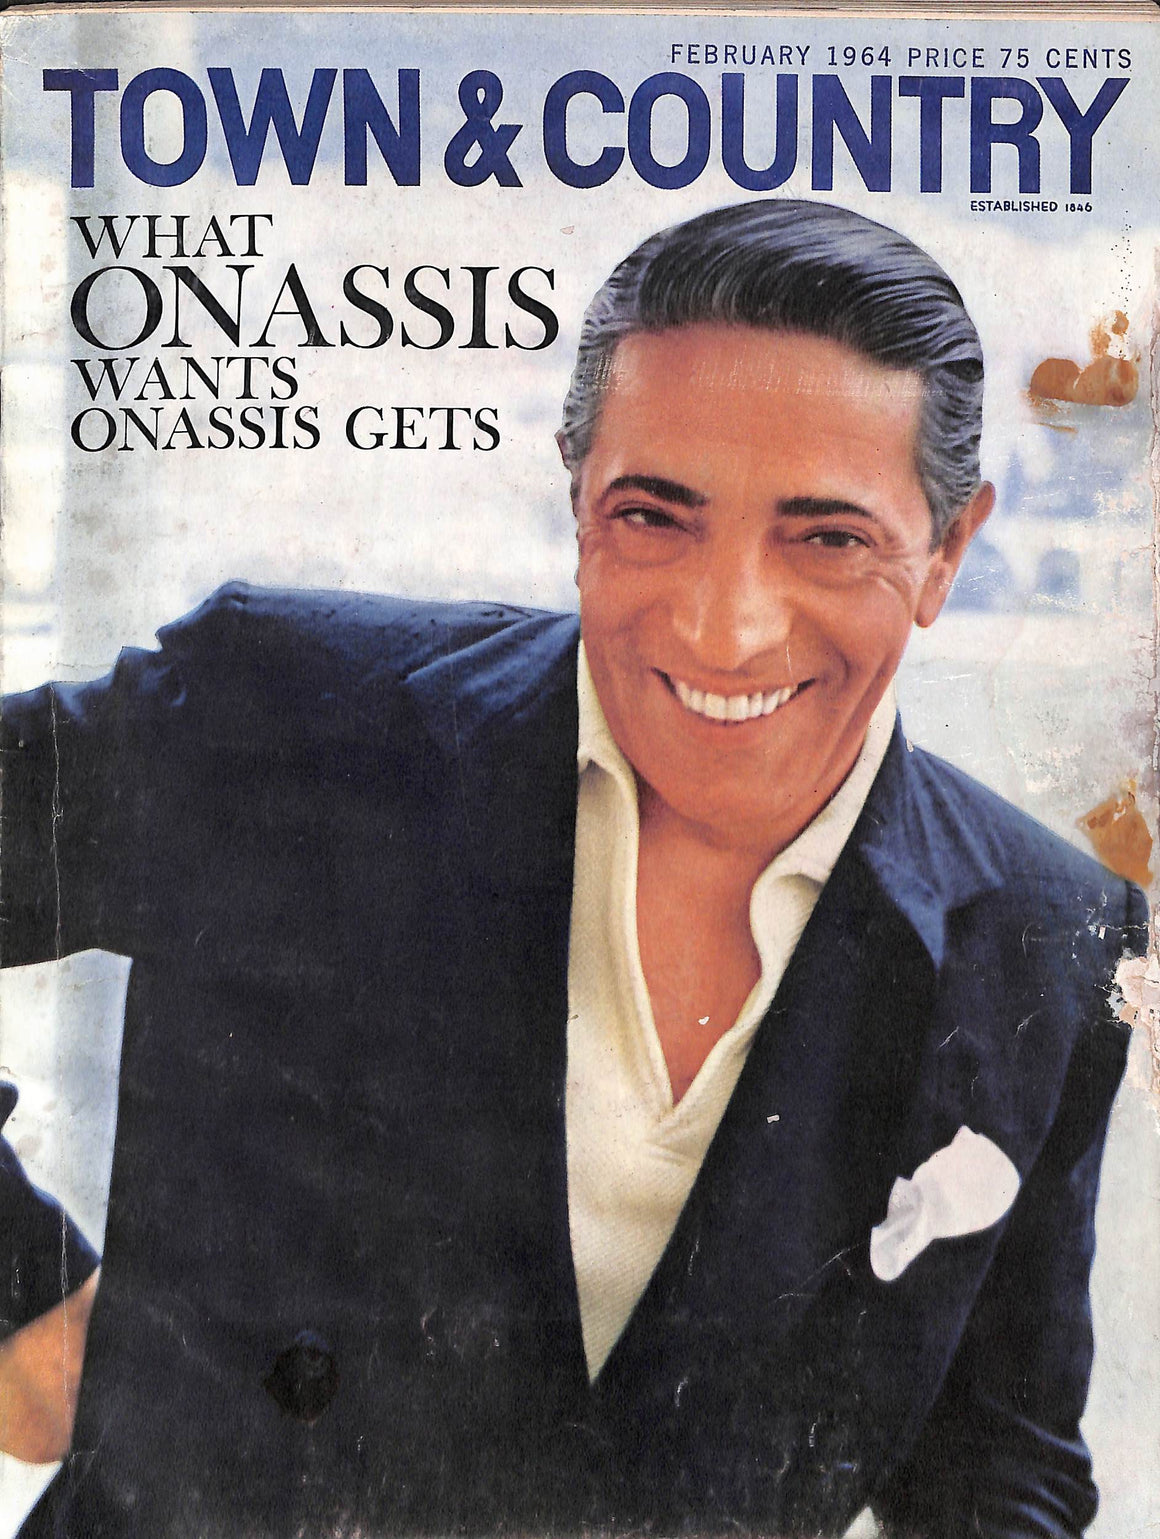 "Town & Country" February 1964: What Onassis Wants Onassis Gets (SOLD)